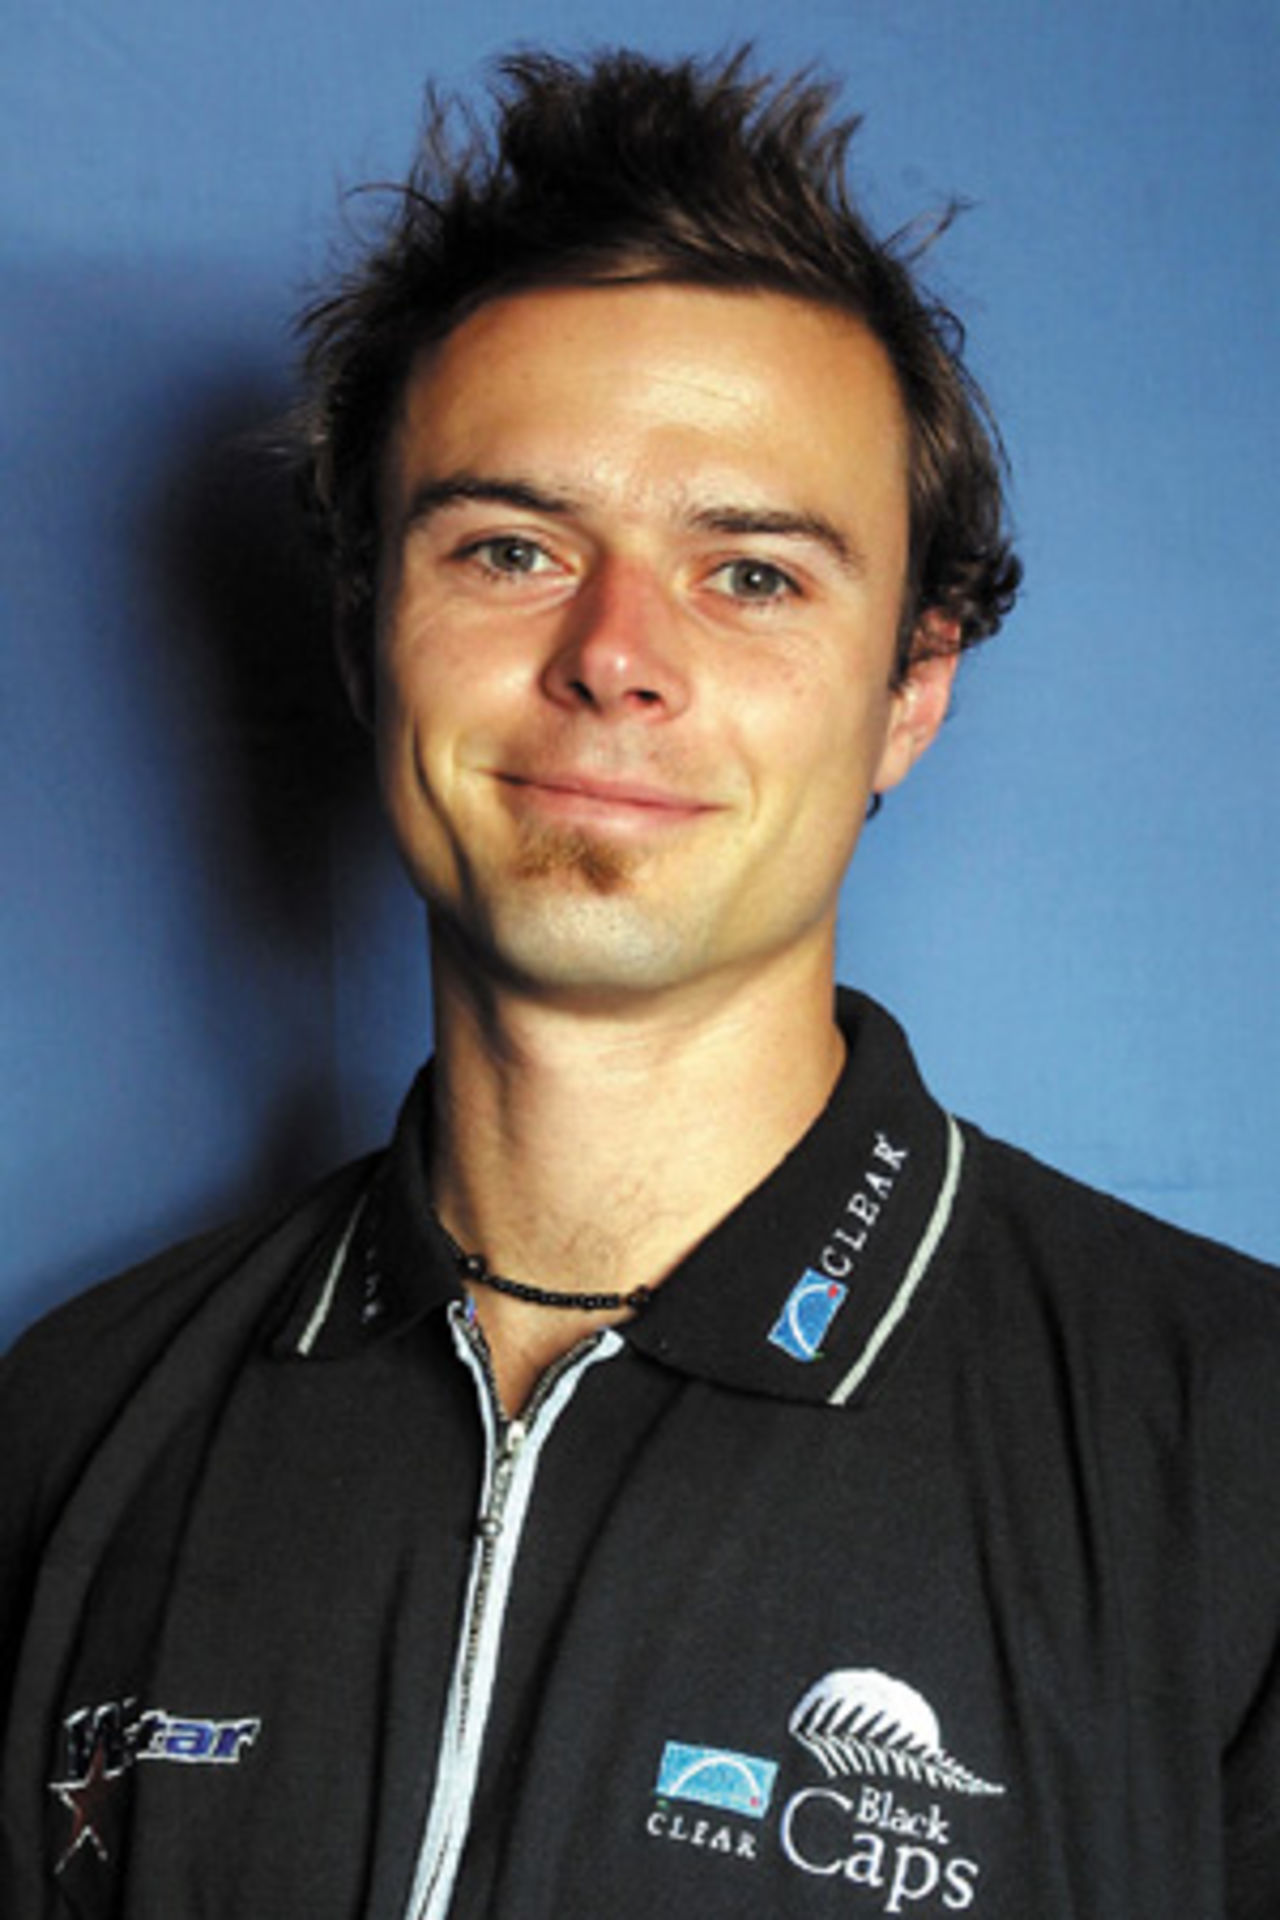 Portrait of Chris Martin - New Zealand player in the 2001/02 season.